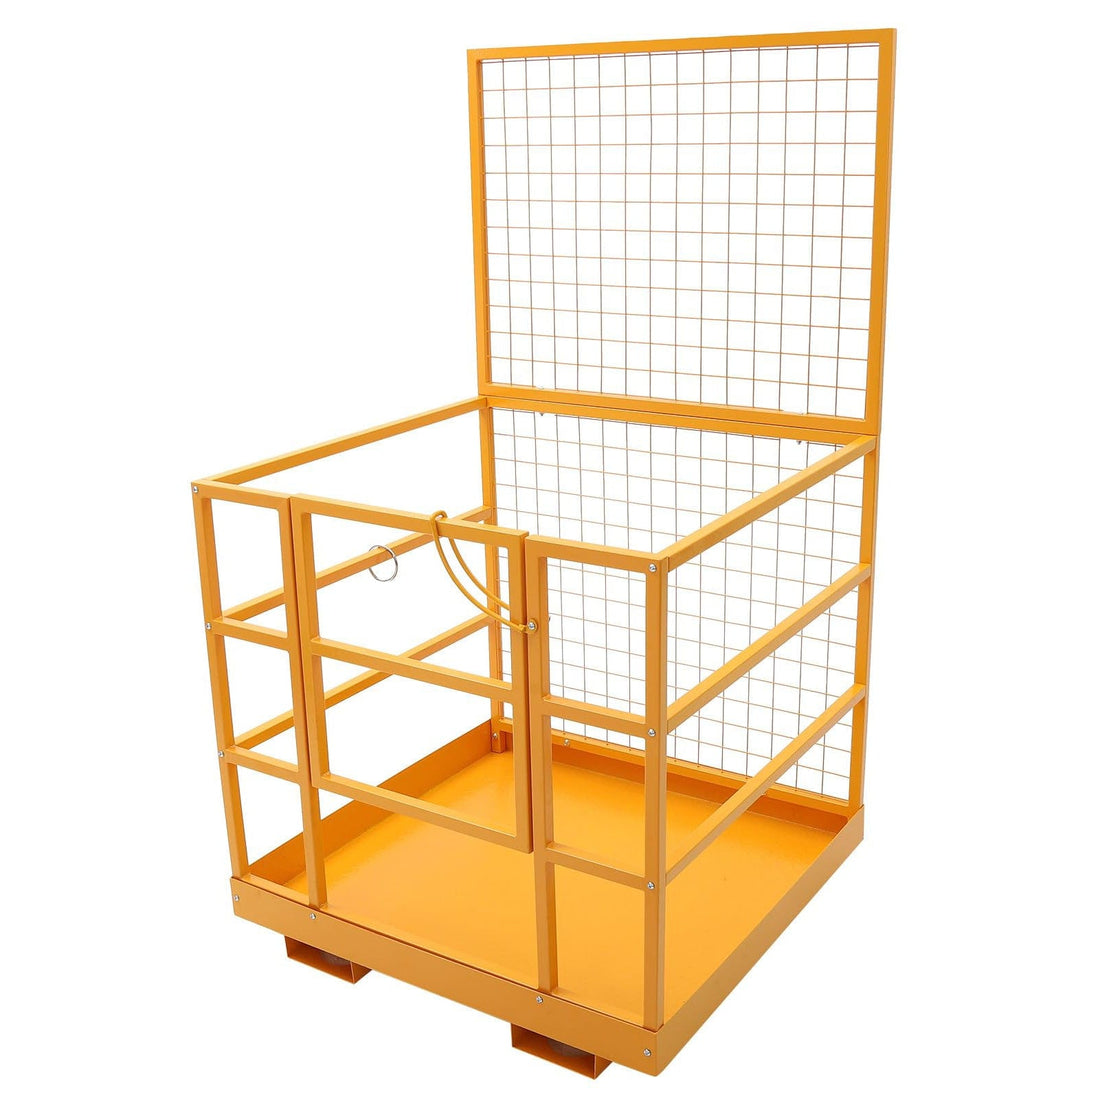 43x45" Forklift Safety Cage, 1400LBS, Heavy Duty Platform